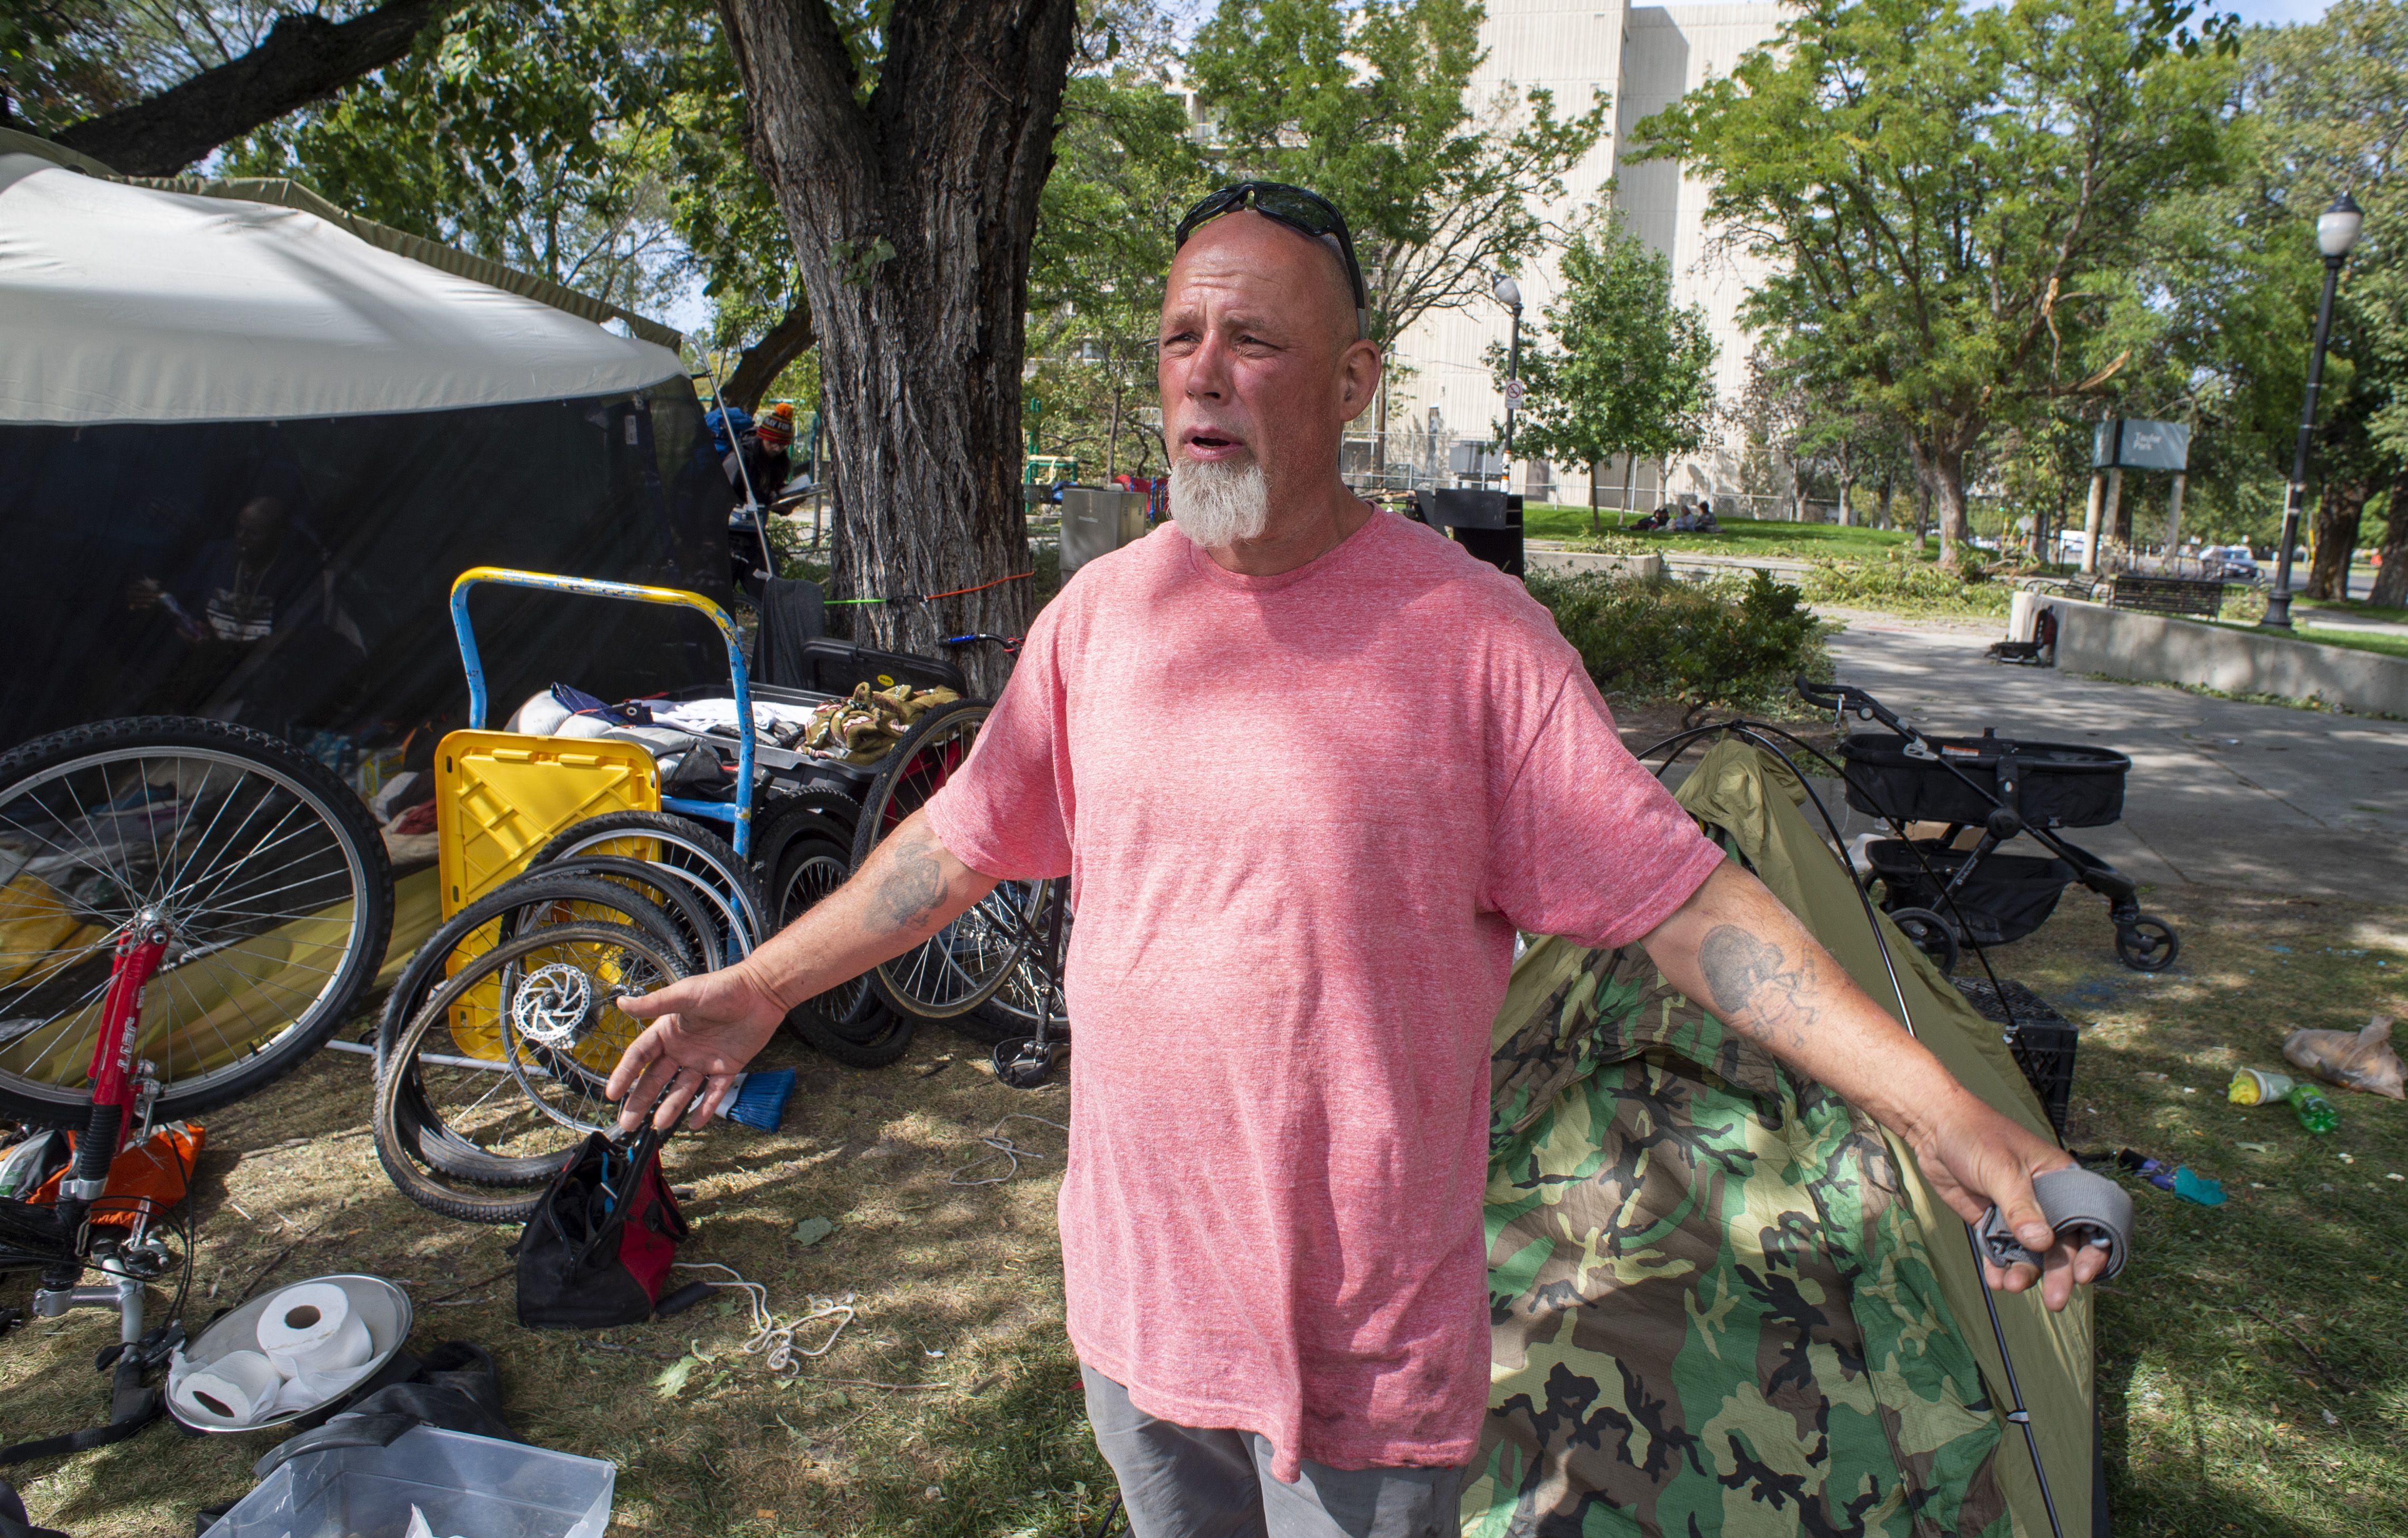 (Rick Egan  |  The Salt Lake Tribune) Richard Ryan discusses his options as he will be forced to move his camp at Taufer Park in Salt Lake City first thing in the morning, and fears everything will be taken from him if he is not prepared when they arrive, Wednesday, Sept. 9, 2020.